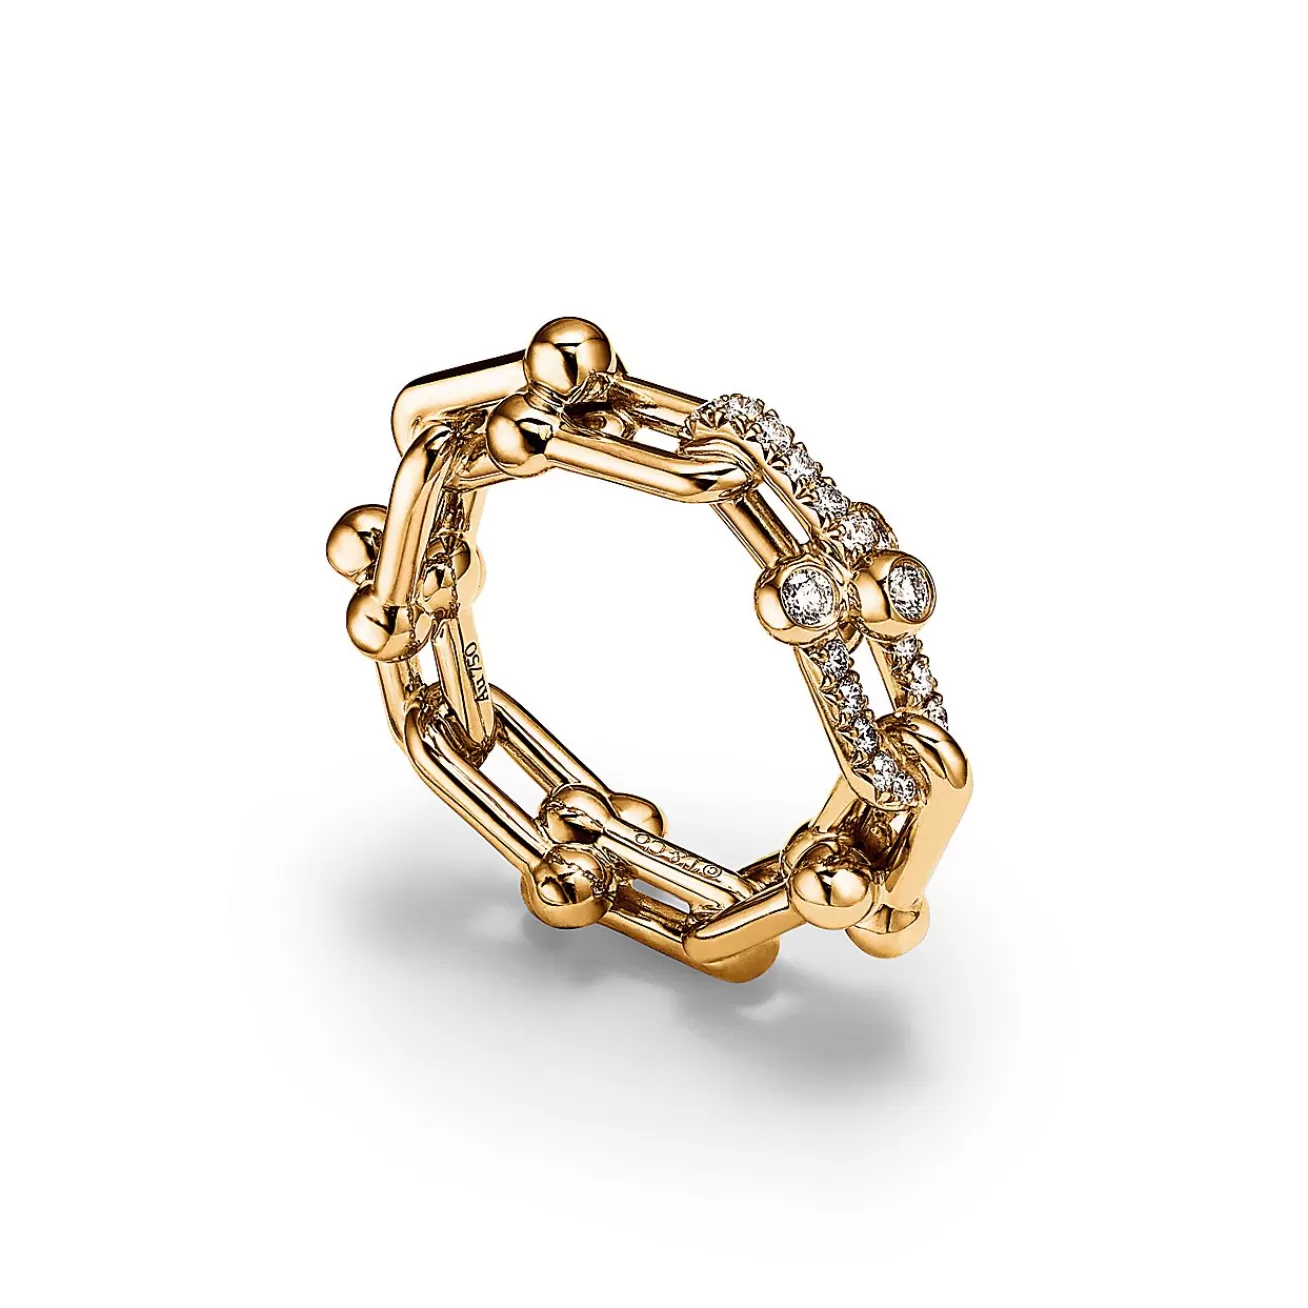 Tiffany & Co. Tiffany HardWear Small Link Ring in Yellow Gold with Diamonds | ^ Rings | New Jewelry